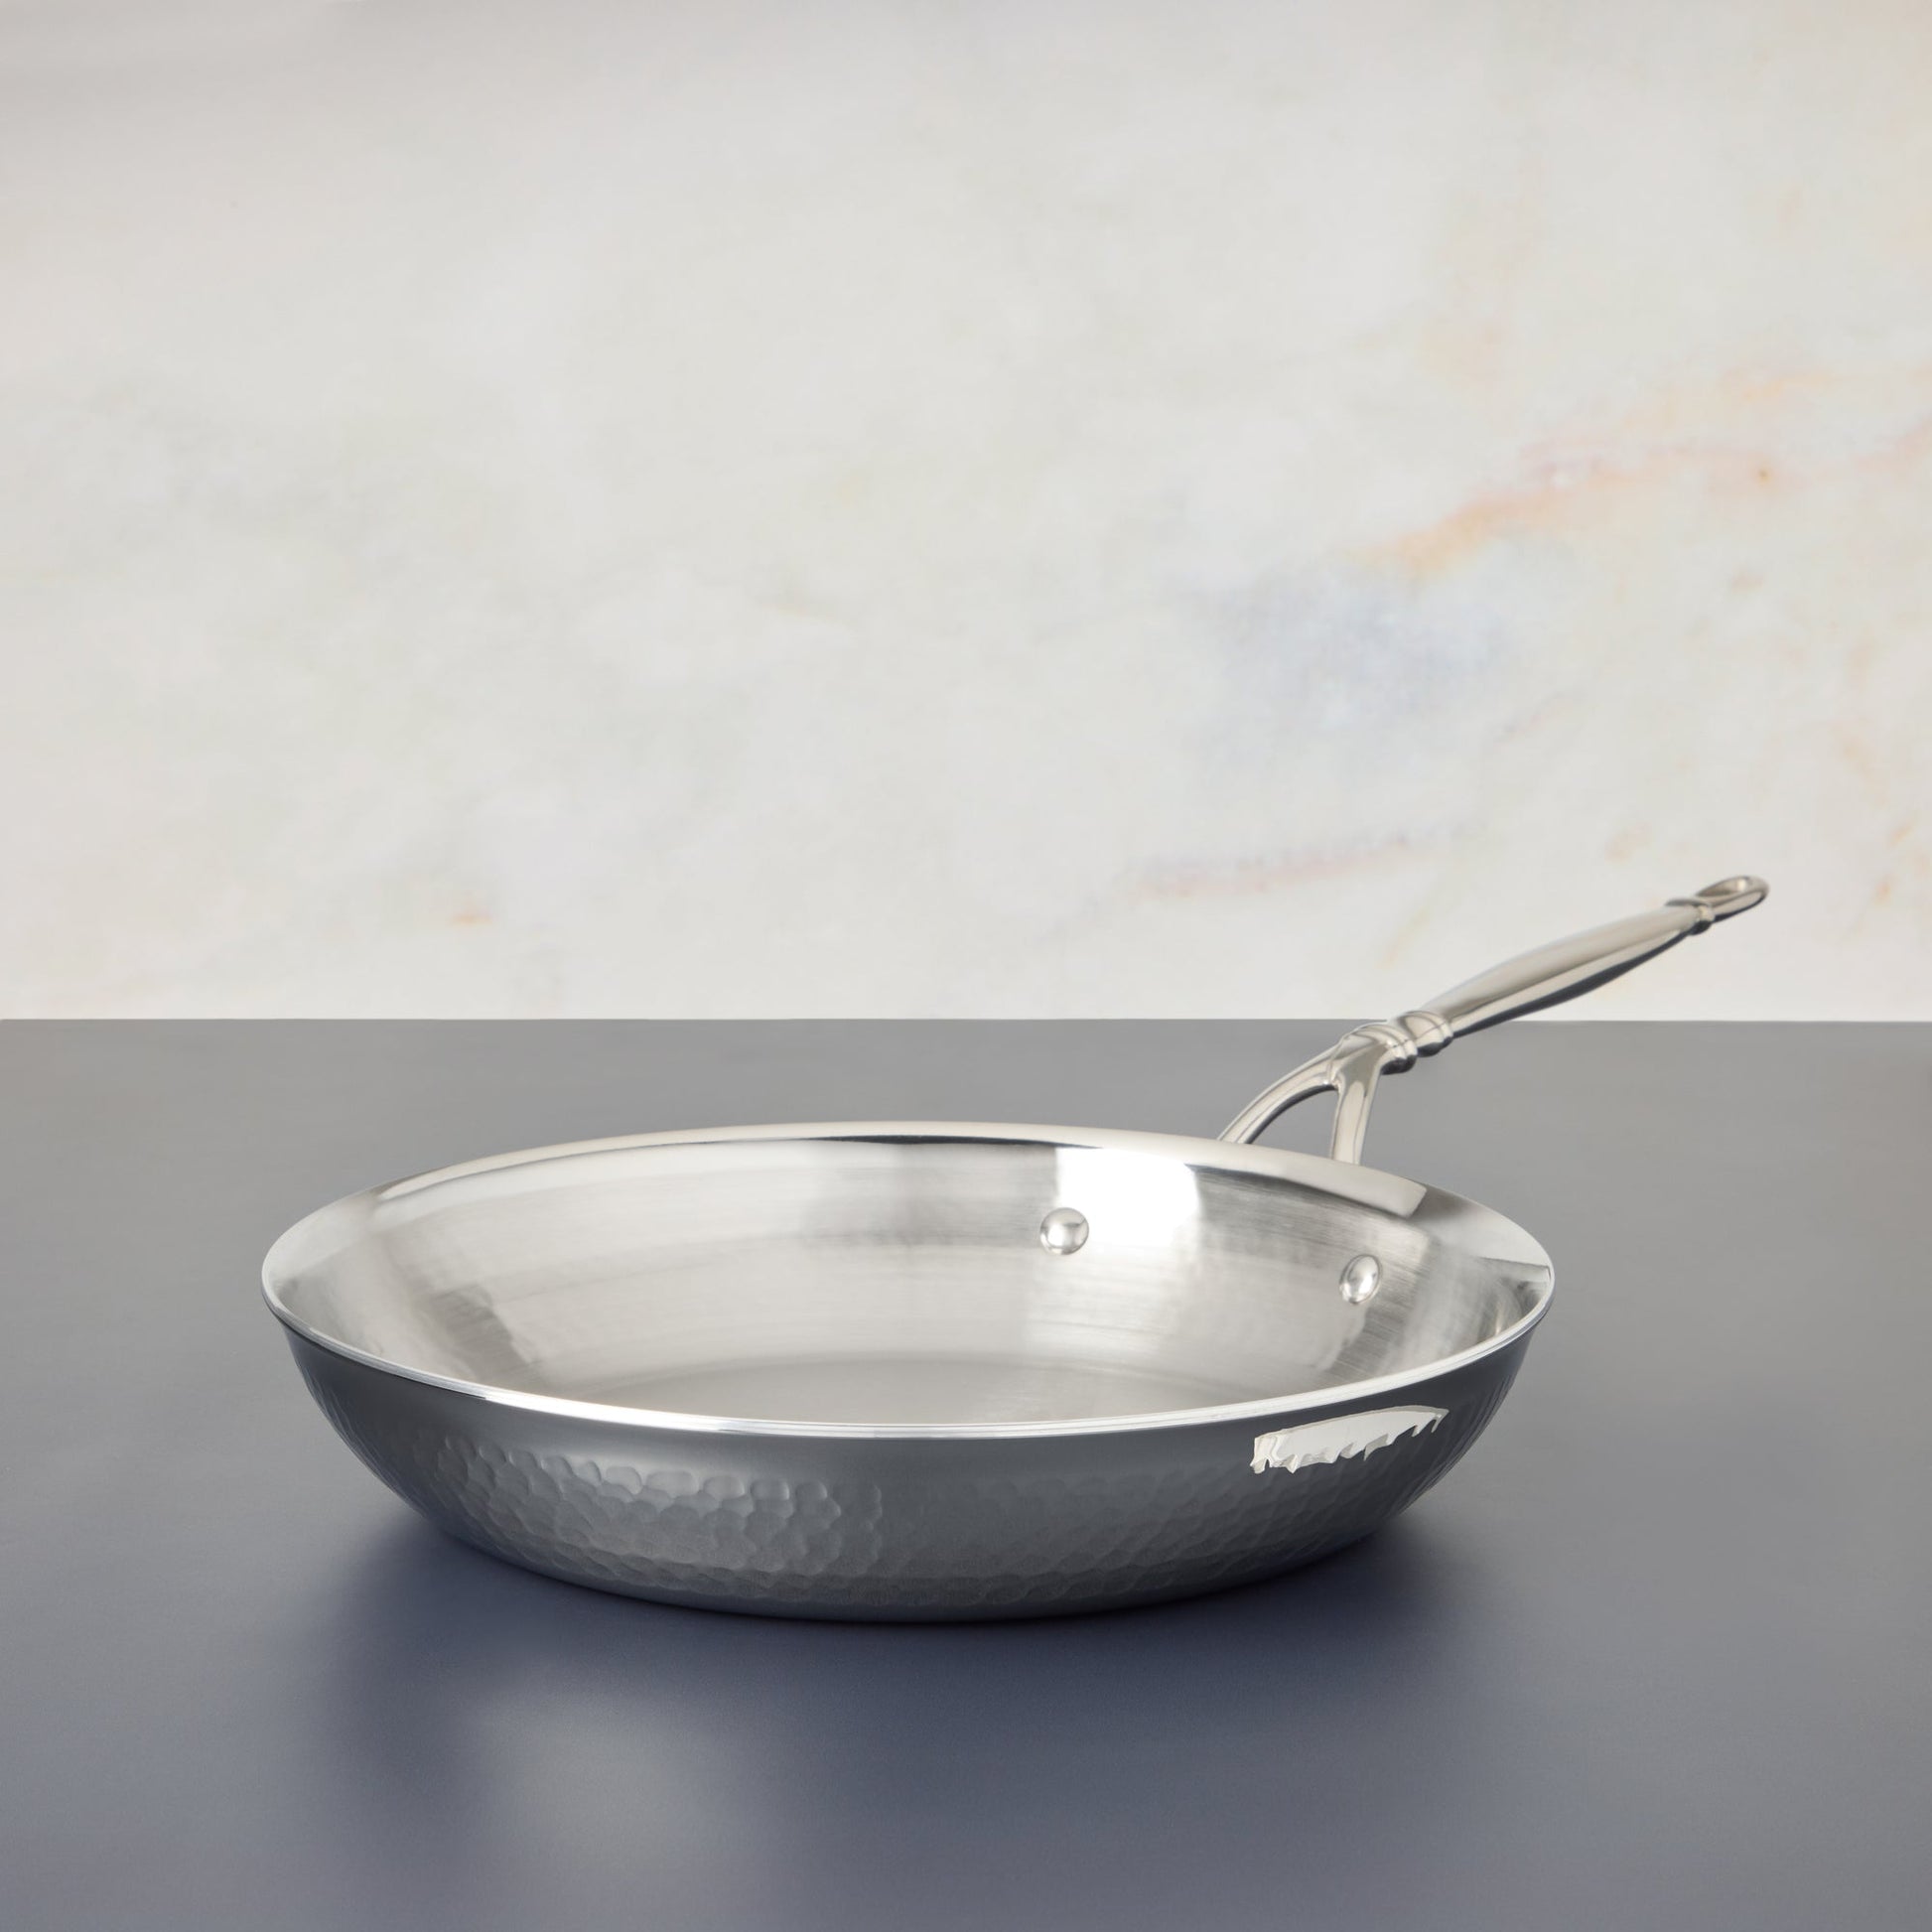 Opus Prima hammered clad stainless steel frying pan from Ruffoni